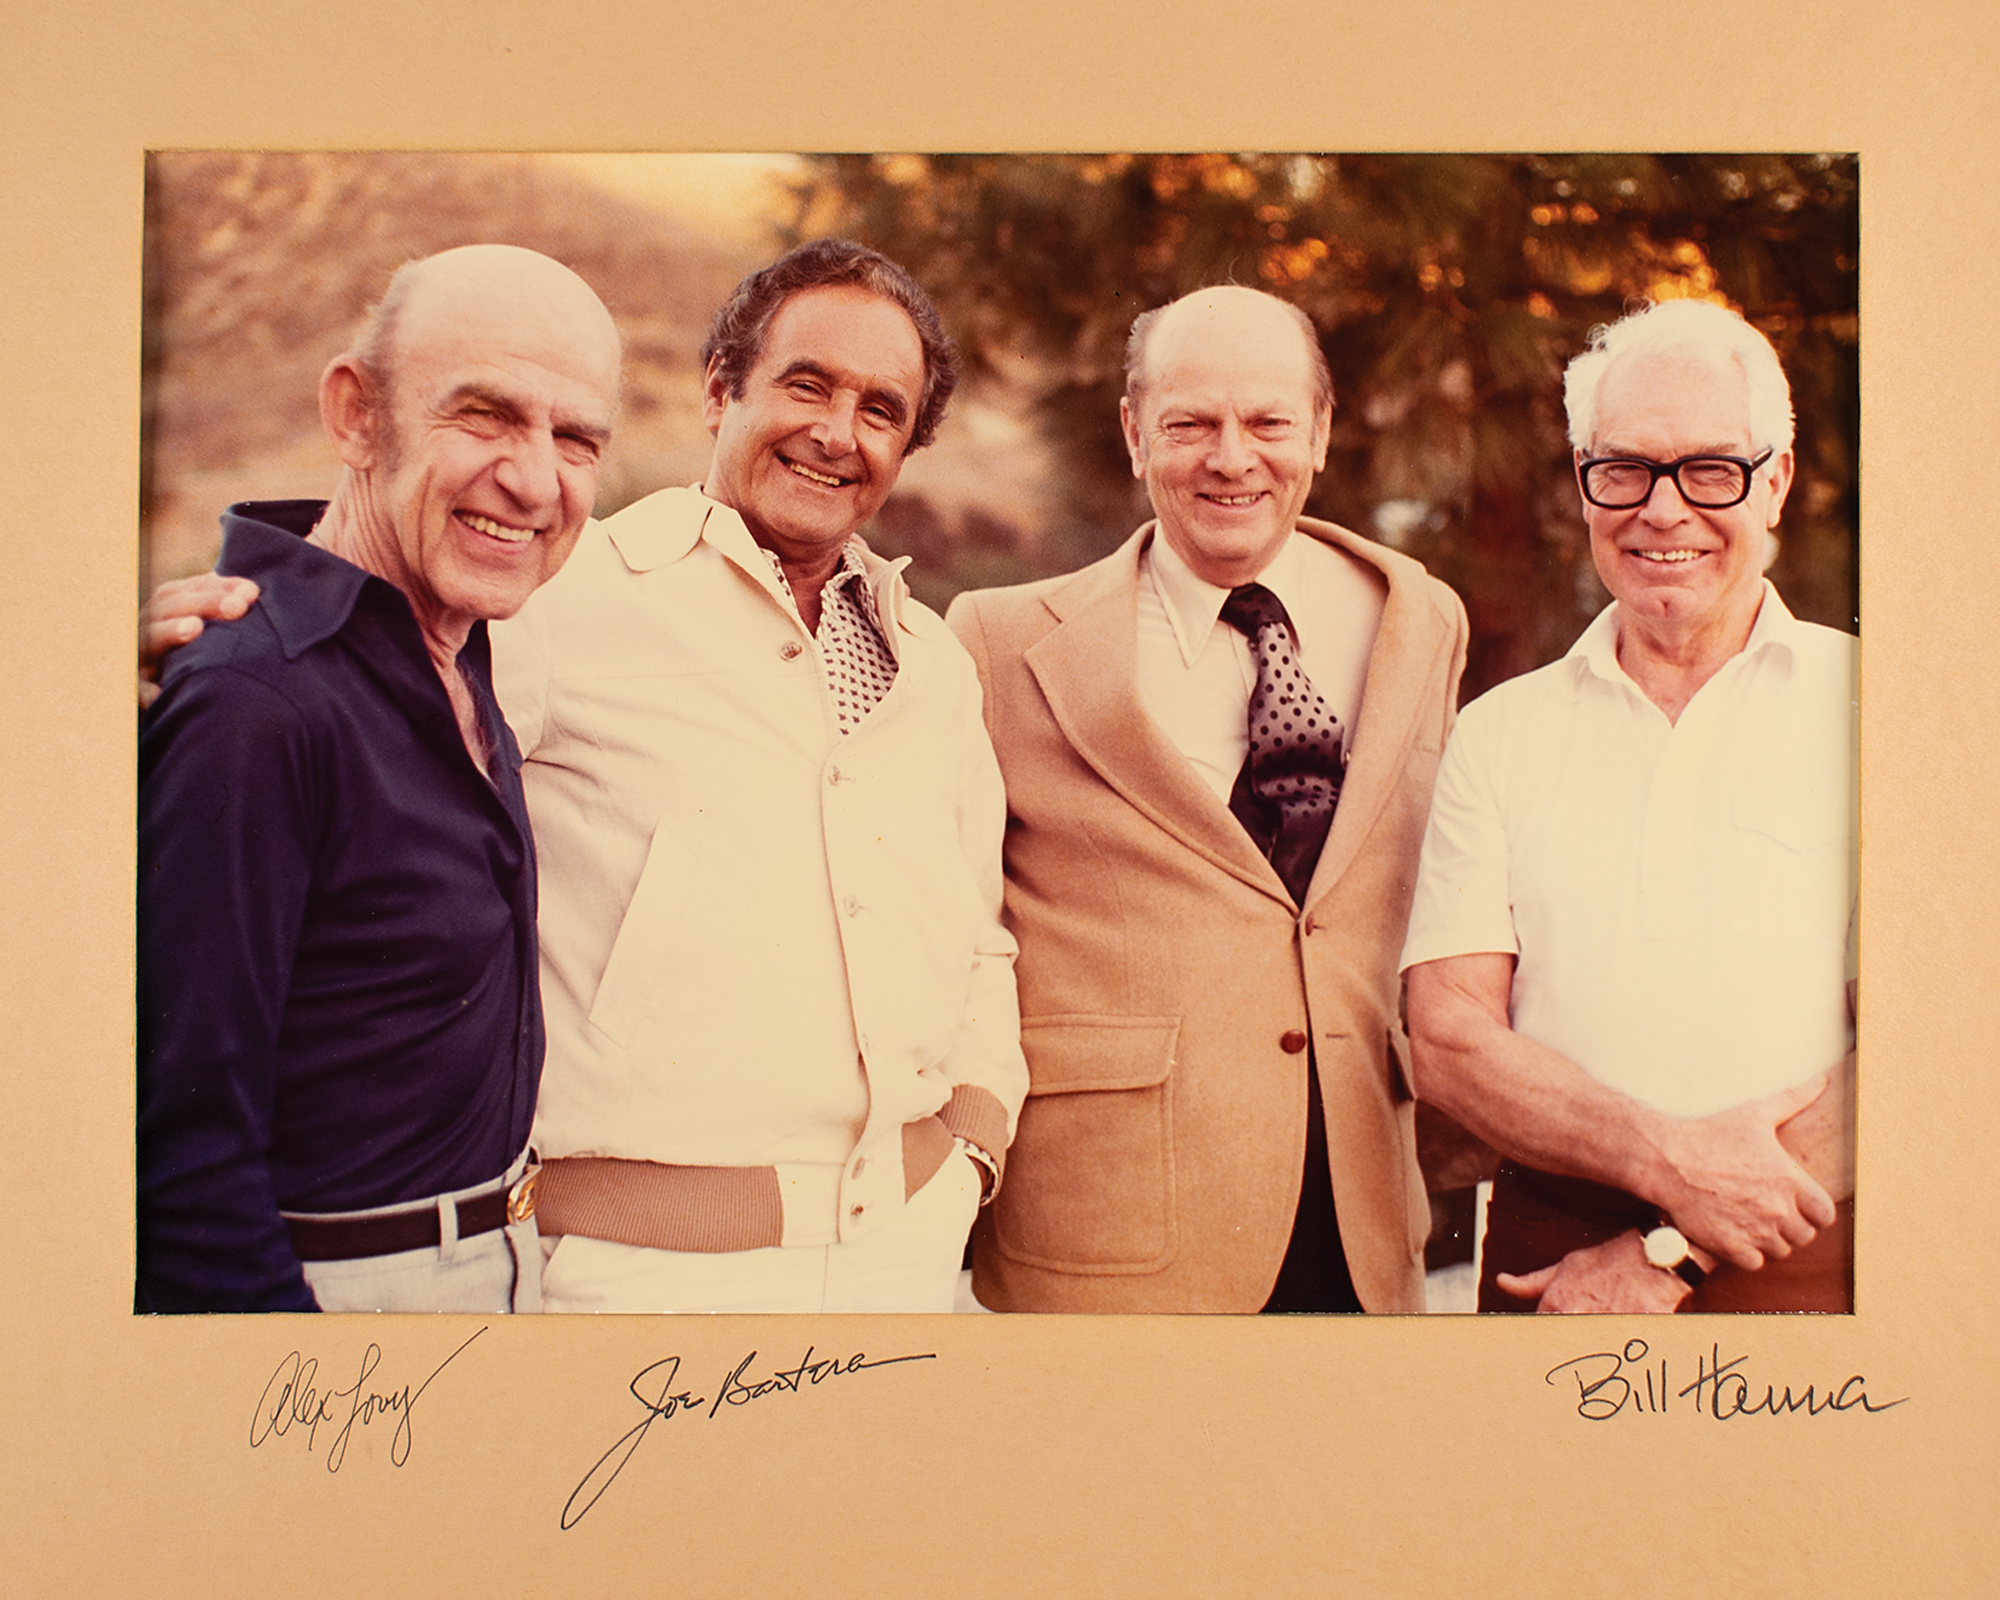 Bill Hanna, Joe Barbera, and Alex Lovy Signed Photograph | Sold for $0 | RR  Auction